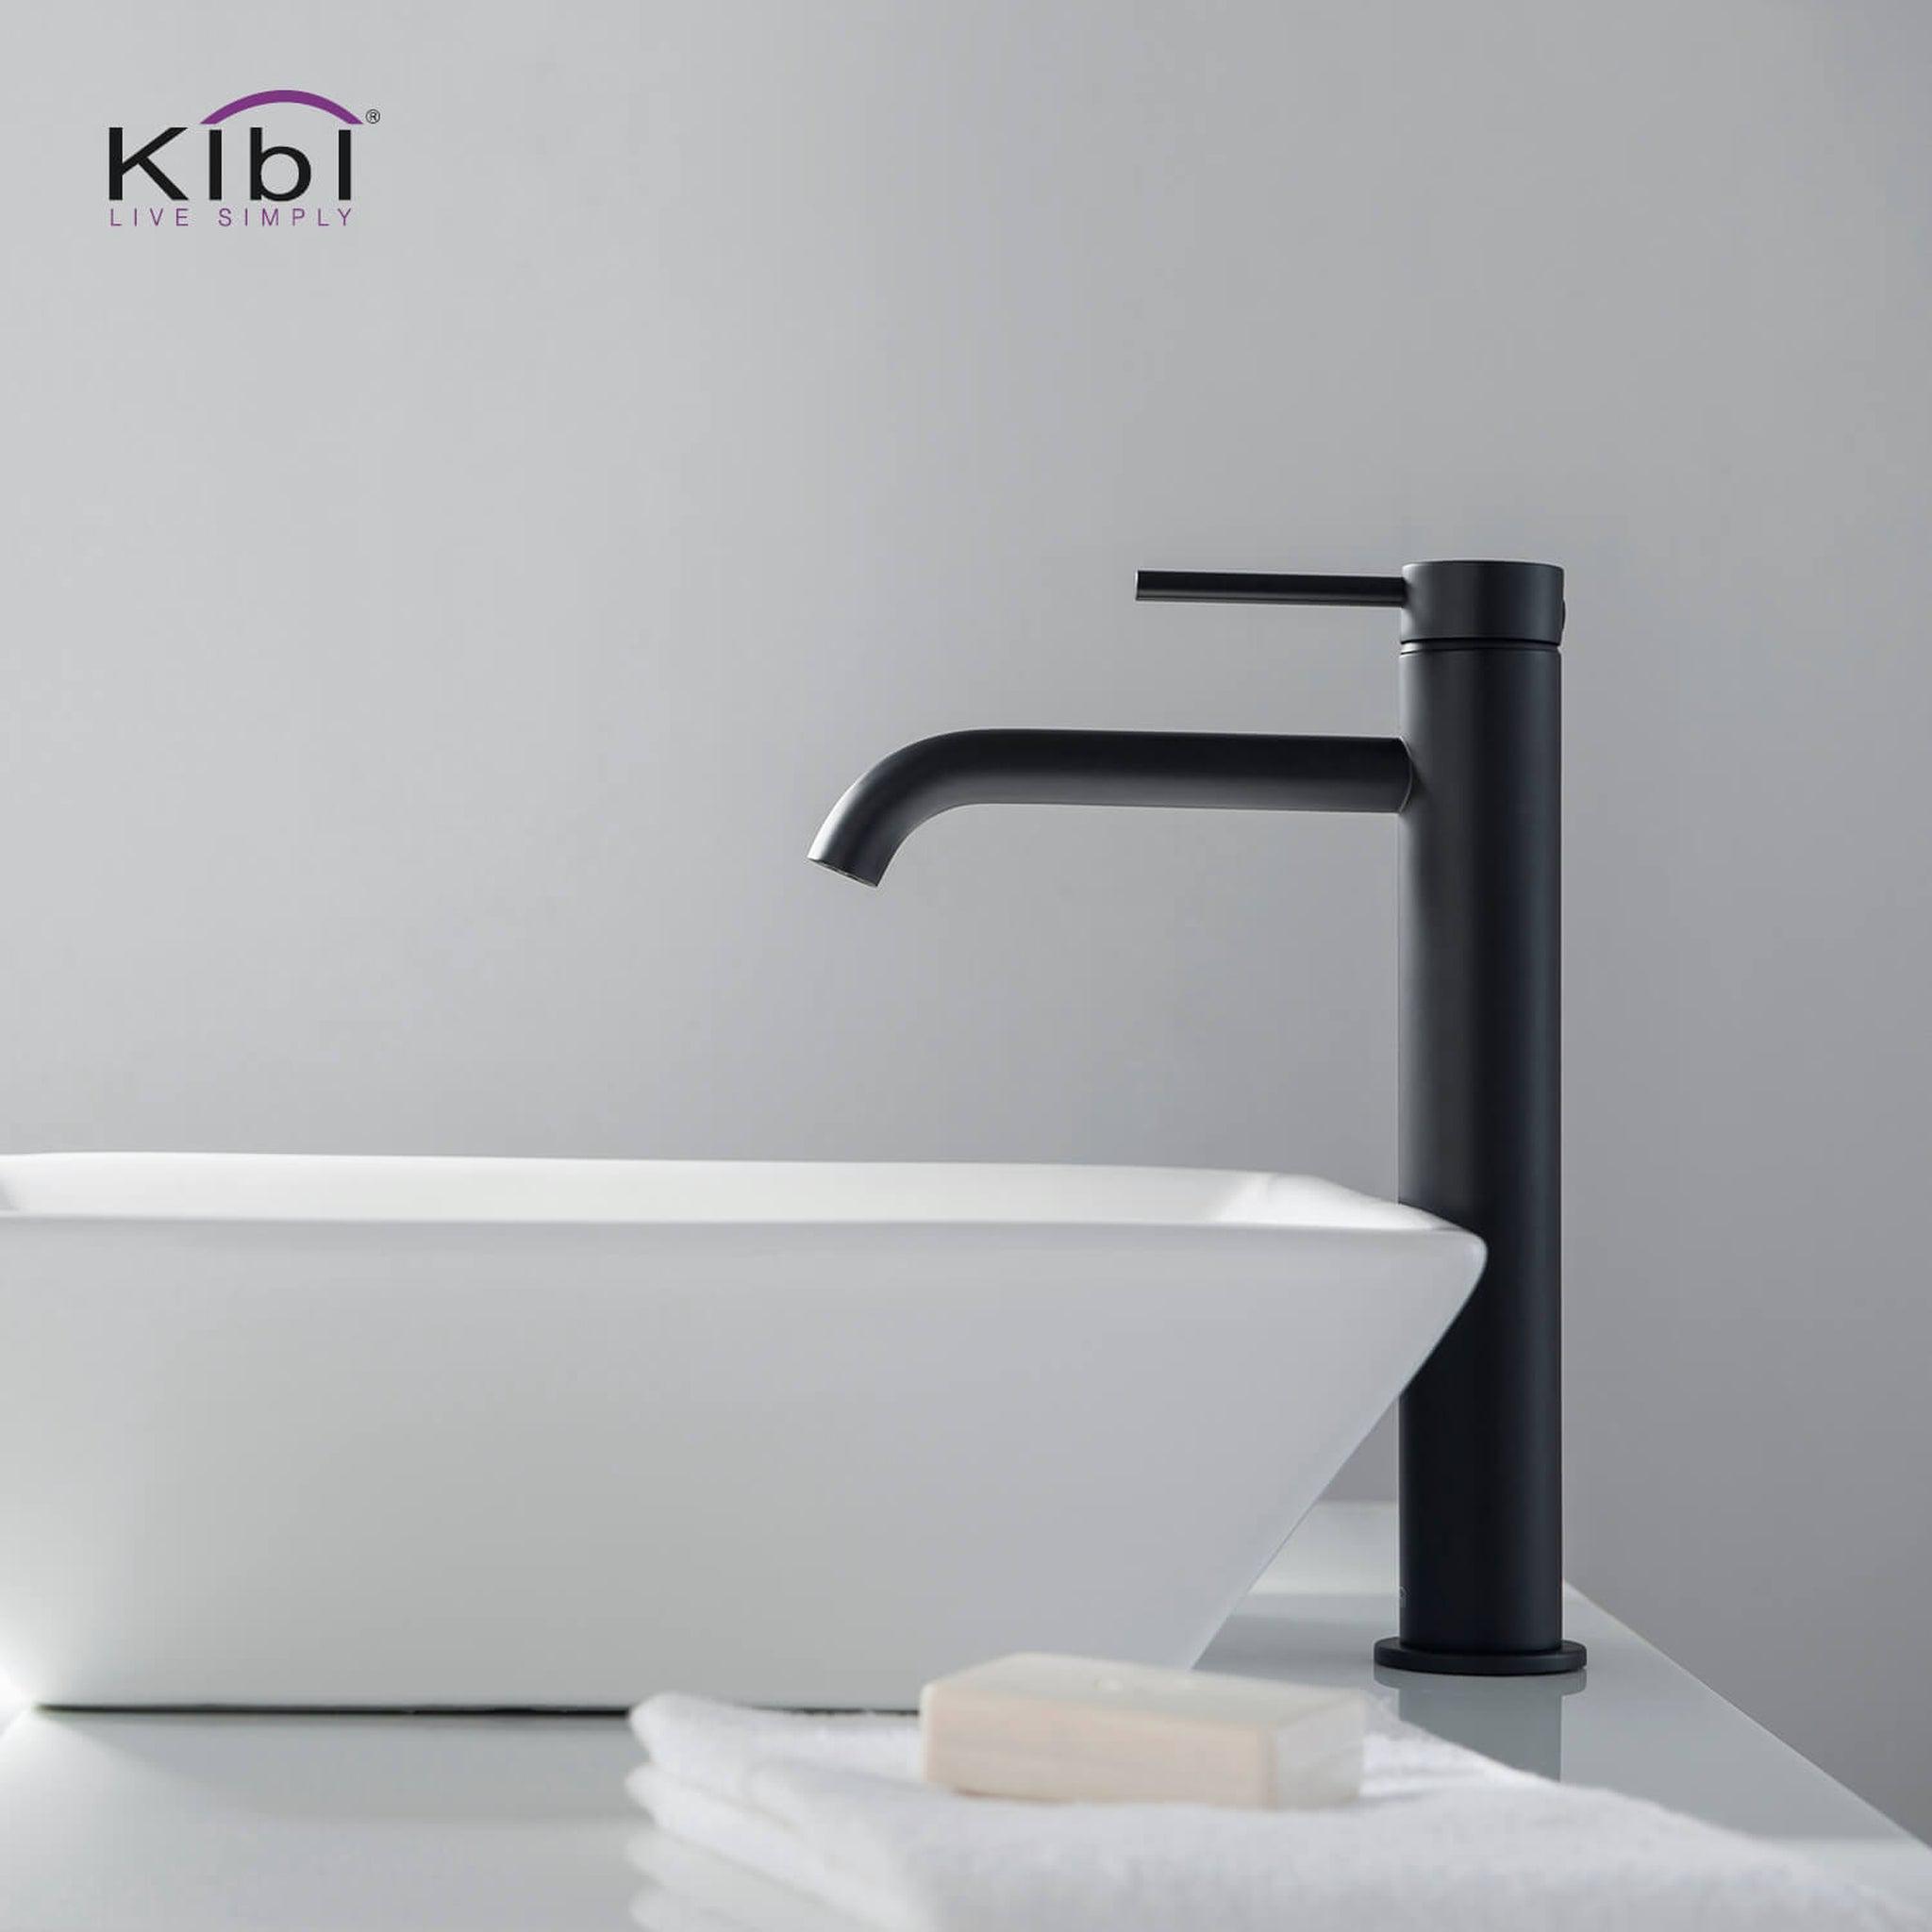 KIBI, KIBI Circular Single Handle Matte Black Solid Brass Bathroom Vessel Sink Faucet With Pop-Up Drain Stopper Small Cover Without Overflow